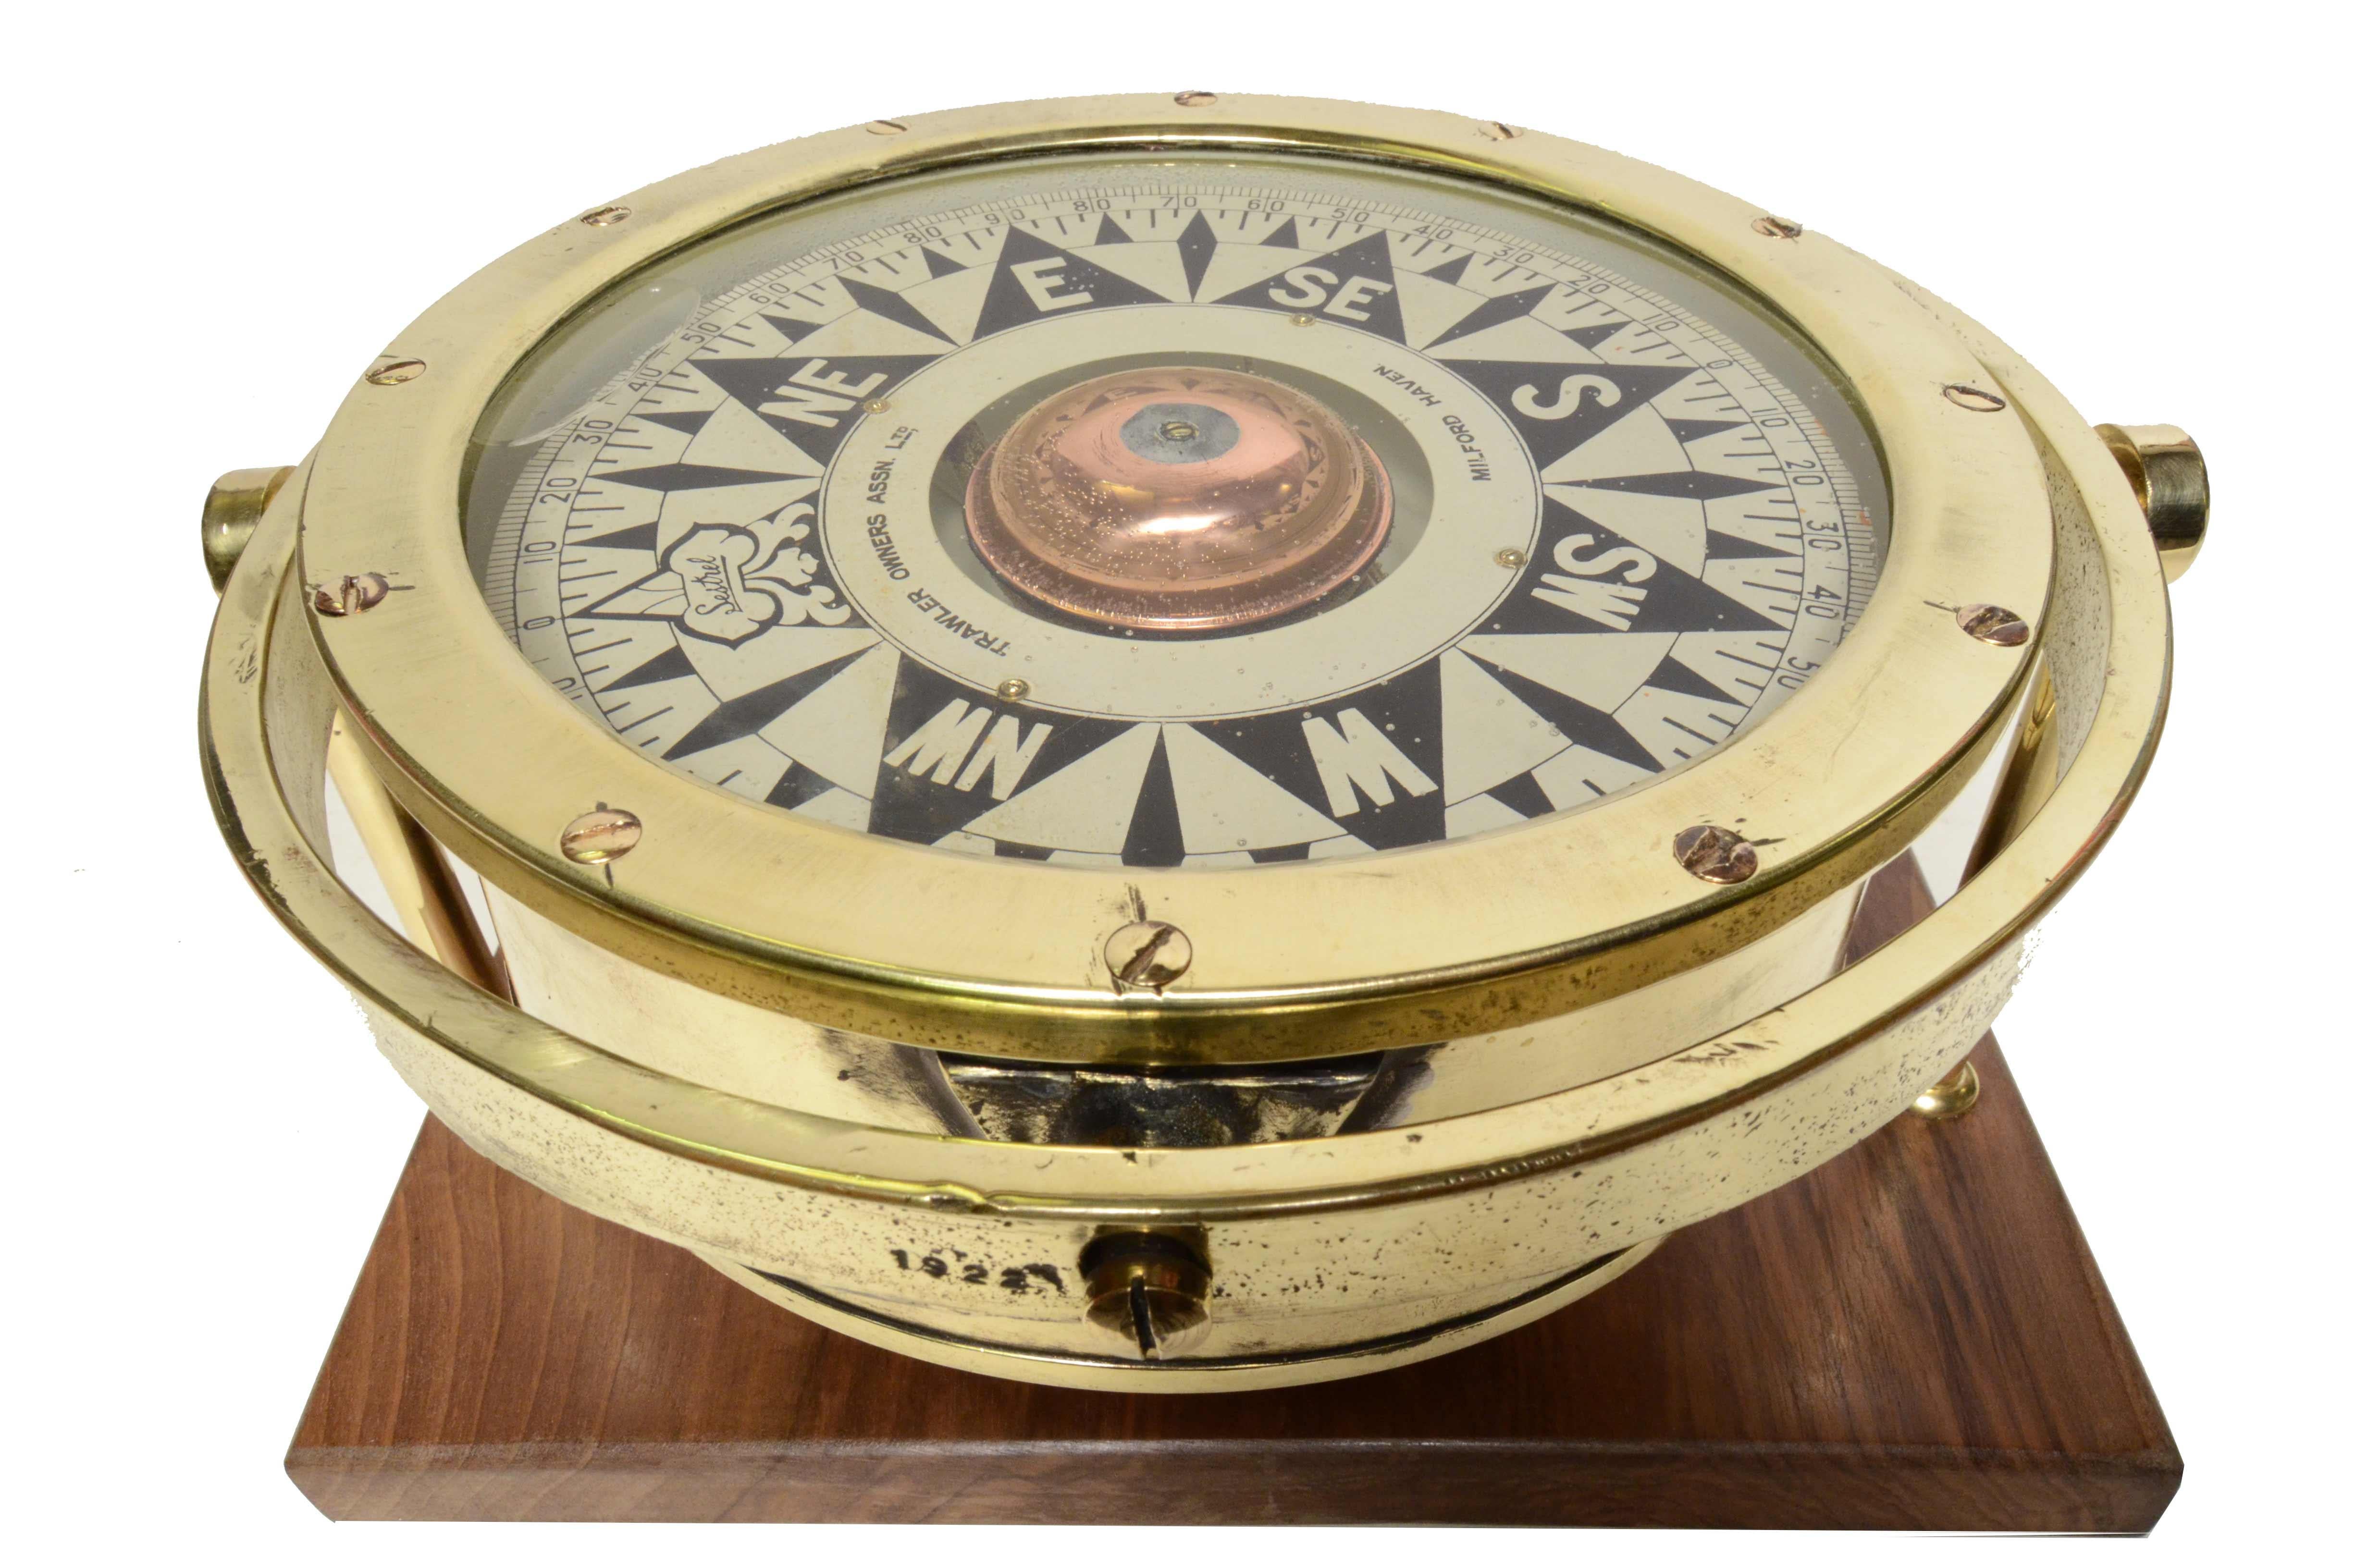 1920s Sestrel gimbal mounted liquid filled nautical compass
made for Trawler Owners Asson. Ltd Milford Haven, a trawler owners association founded in 1917. The compass is mounted on a bespoke walnut board with brass mounts. The compass consists of